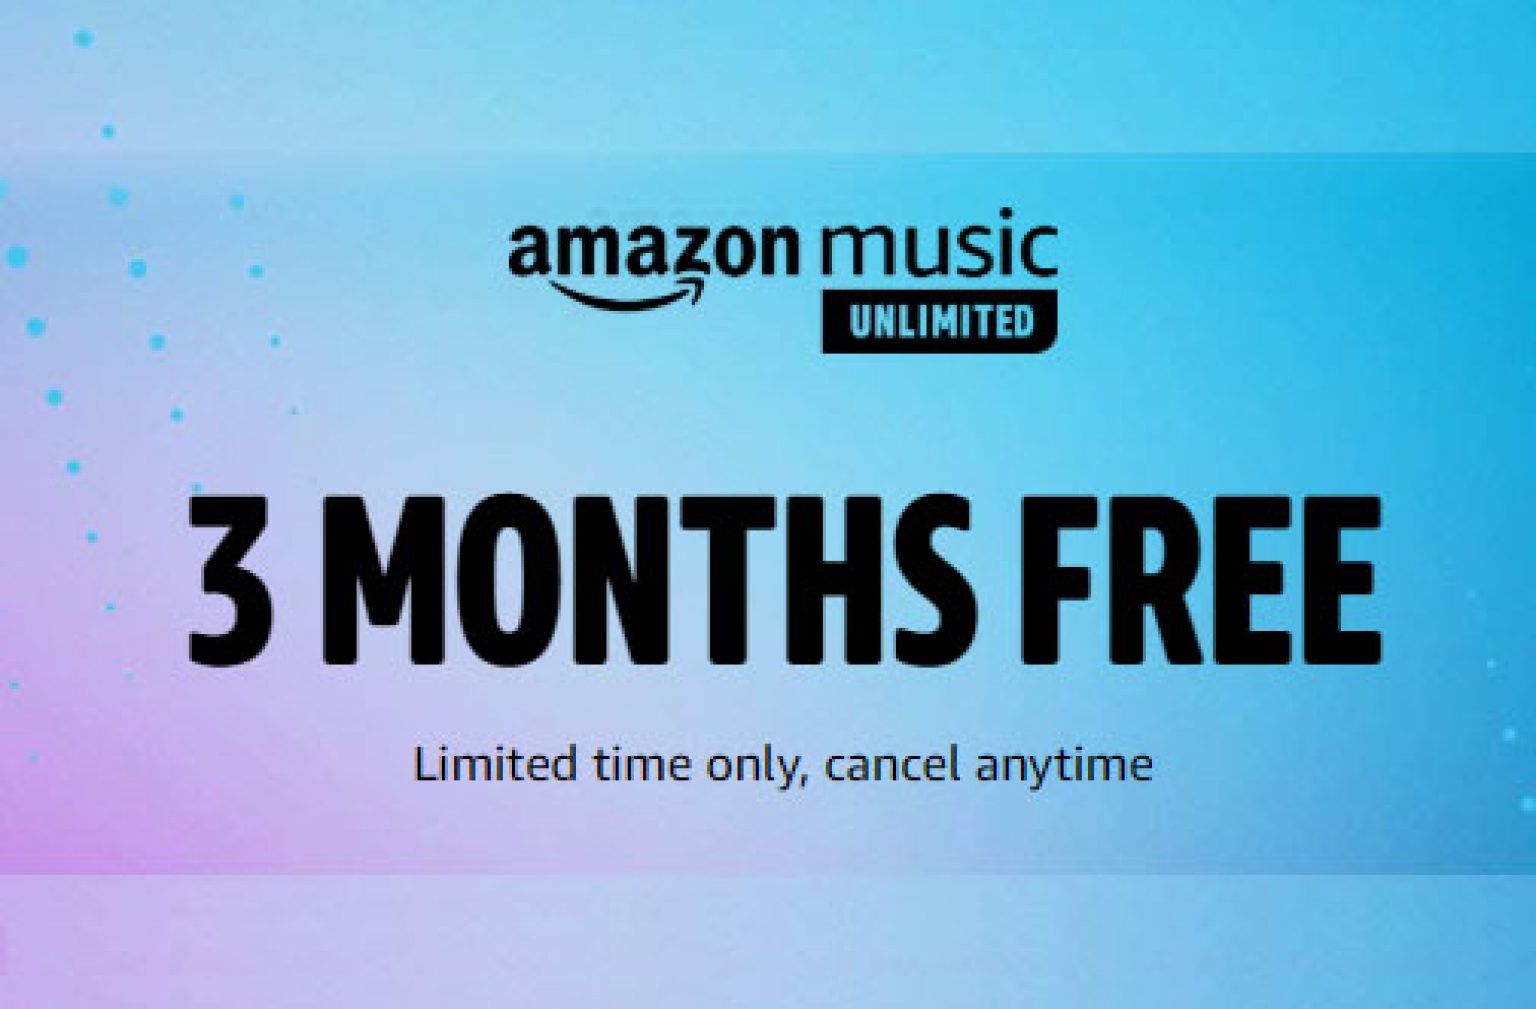 amazon music unlimited 4 months free